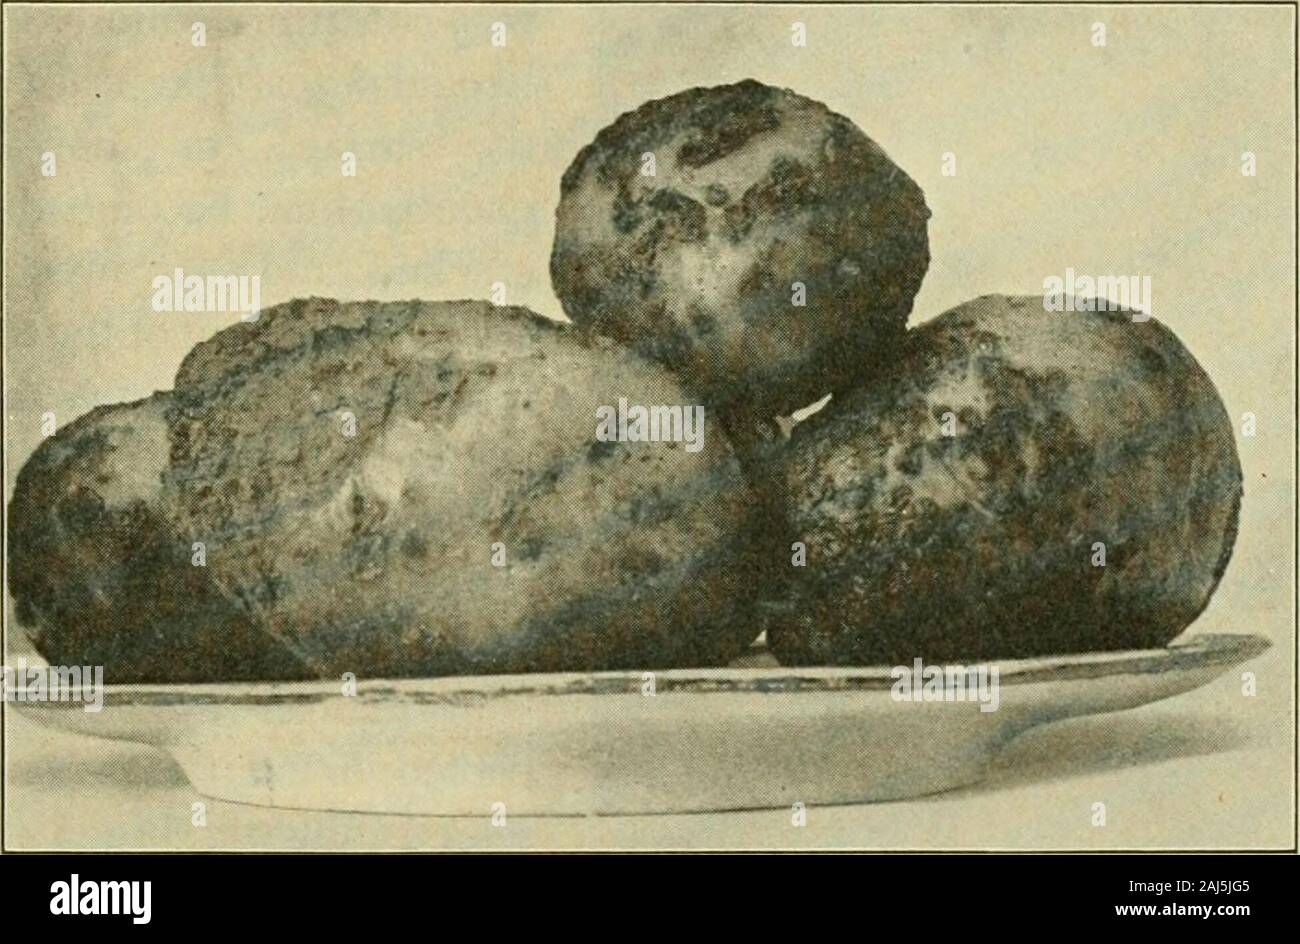 Fungous diseases of plants . The Potato Scab. Conn. Agl. Exp. Sta. (1890):81-95. Thaxter, Roland. The Potato Scab. Conn. Agl. Exp. Sta. (1S91): 153-160. The scab of potatoes is a disease which is well known to grow-ers, dealers, and consumers alike, for the conspicuous scab pits orspots on the surface of tubers cannot fail to strike the attention. 1 A FUNGI IMPERFECTI 291 The disease is most common throughout the United States, anddoubtless throughout the potato-producing regions of Europe aswell. It is not positively demonstrated, however, that all of thesurface injuries known as scab are pro Stock Photo